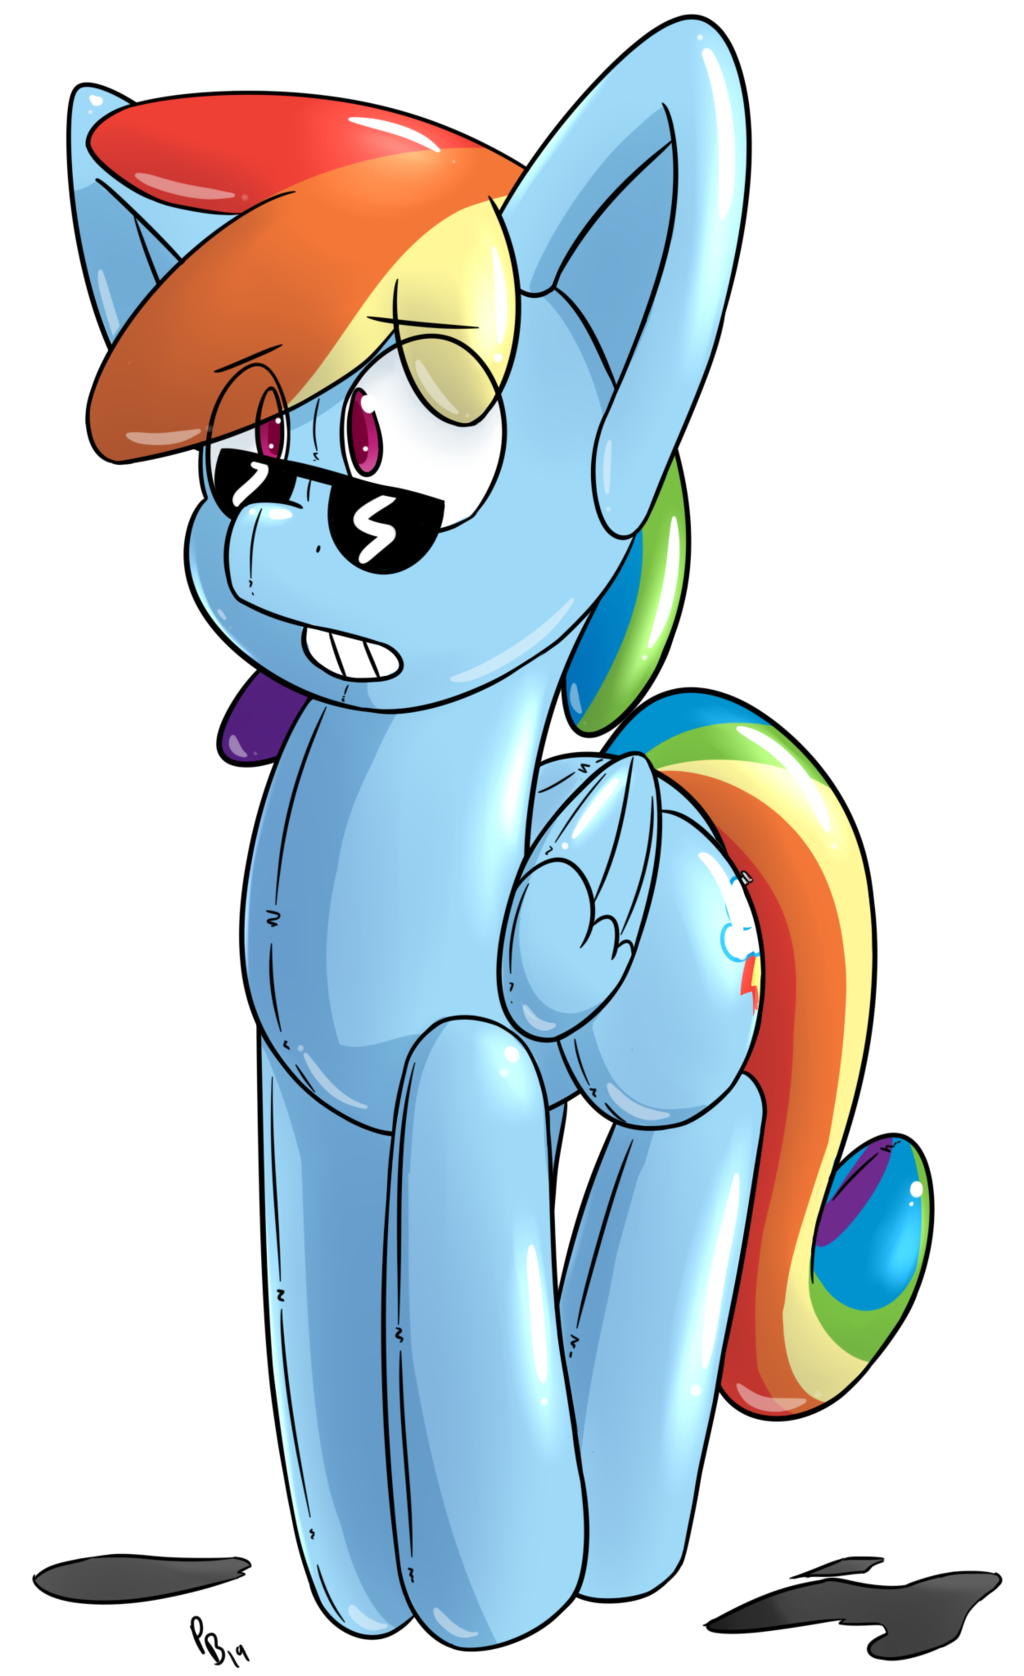 Suddenly Dashie Toy'd by Pon